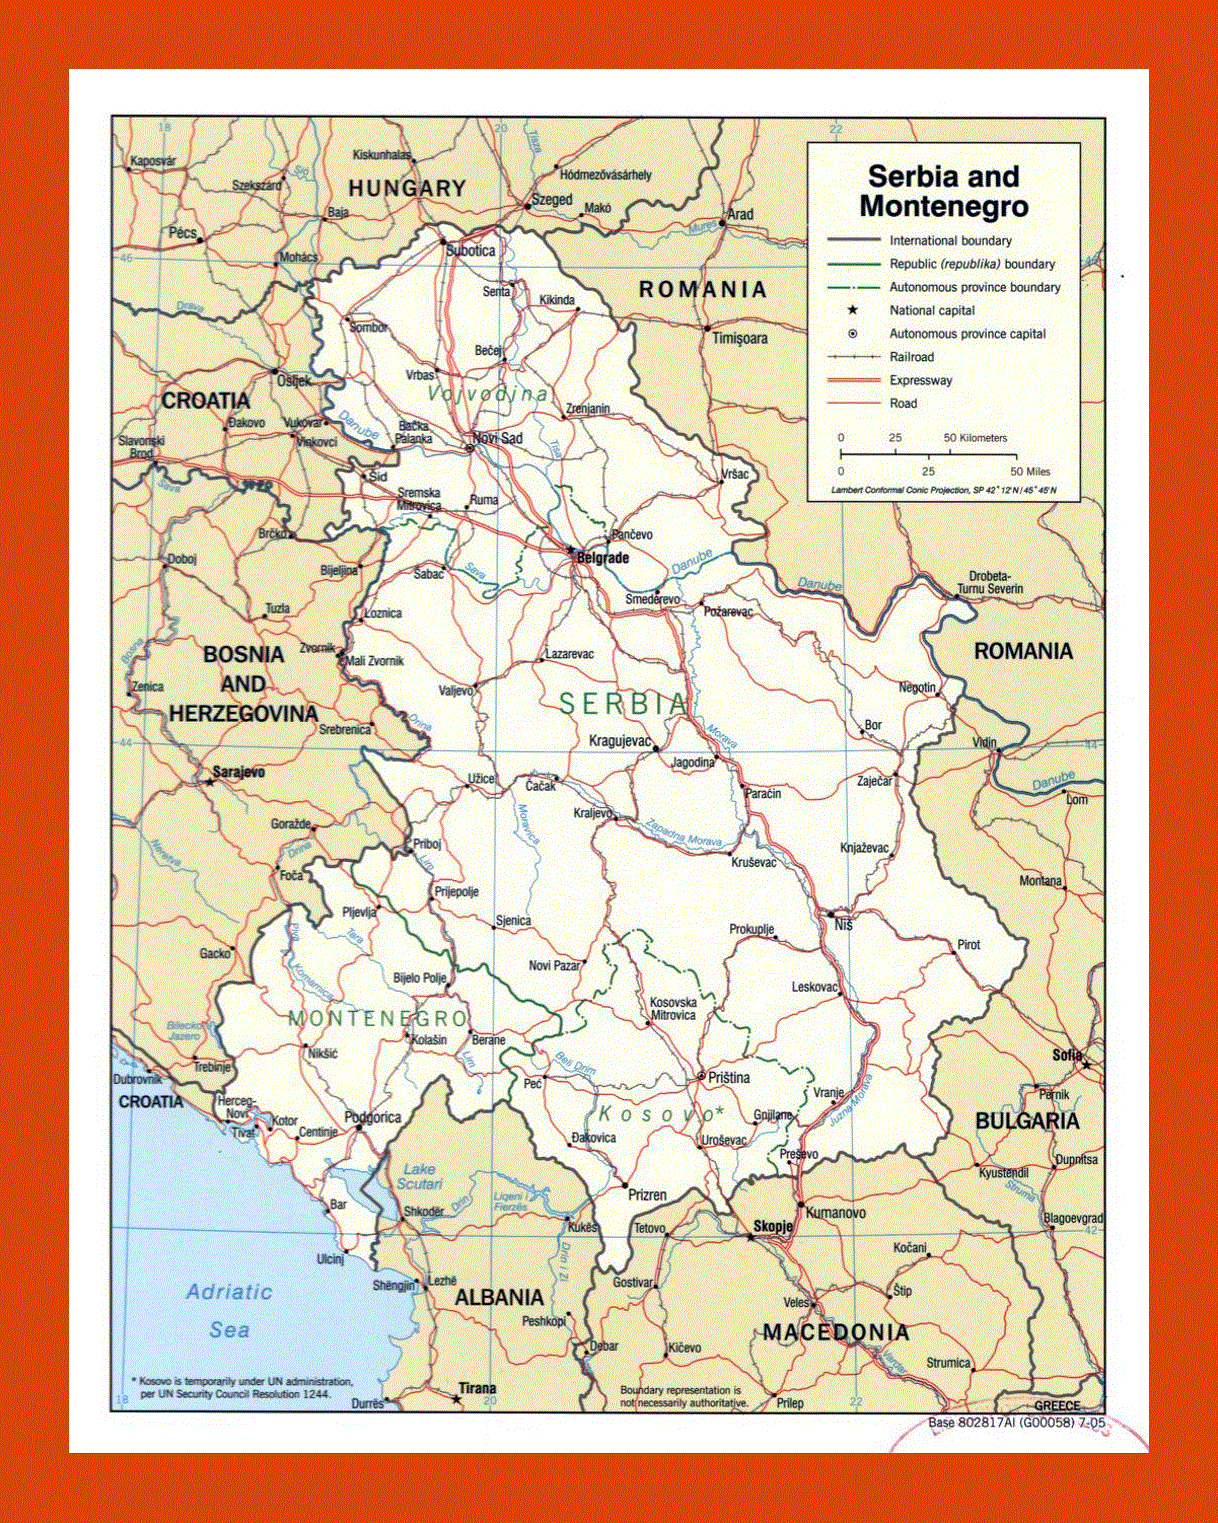 Political map of Serbia and Montenegro - 2005